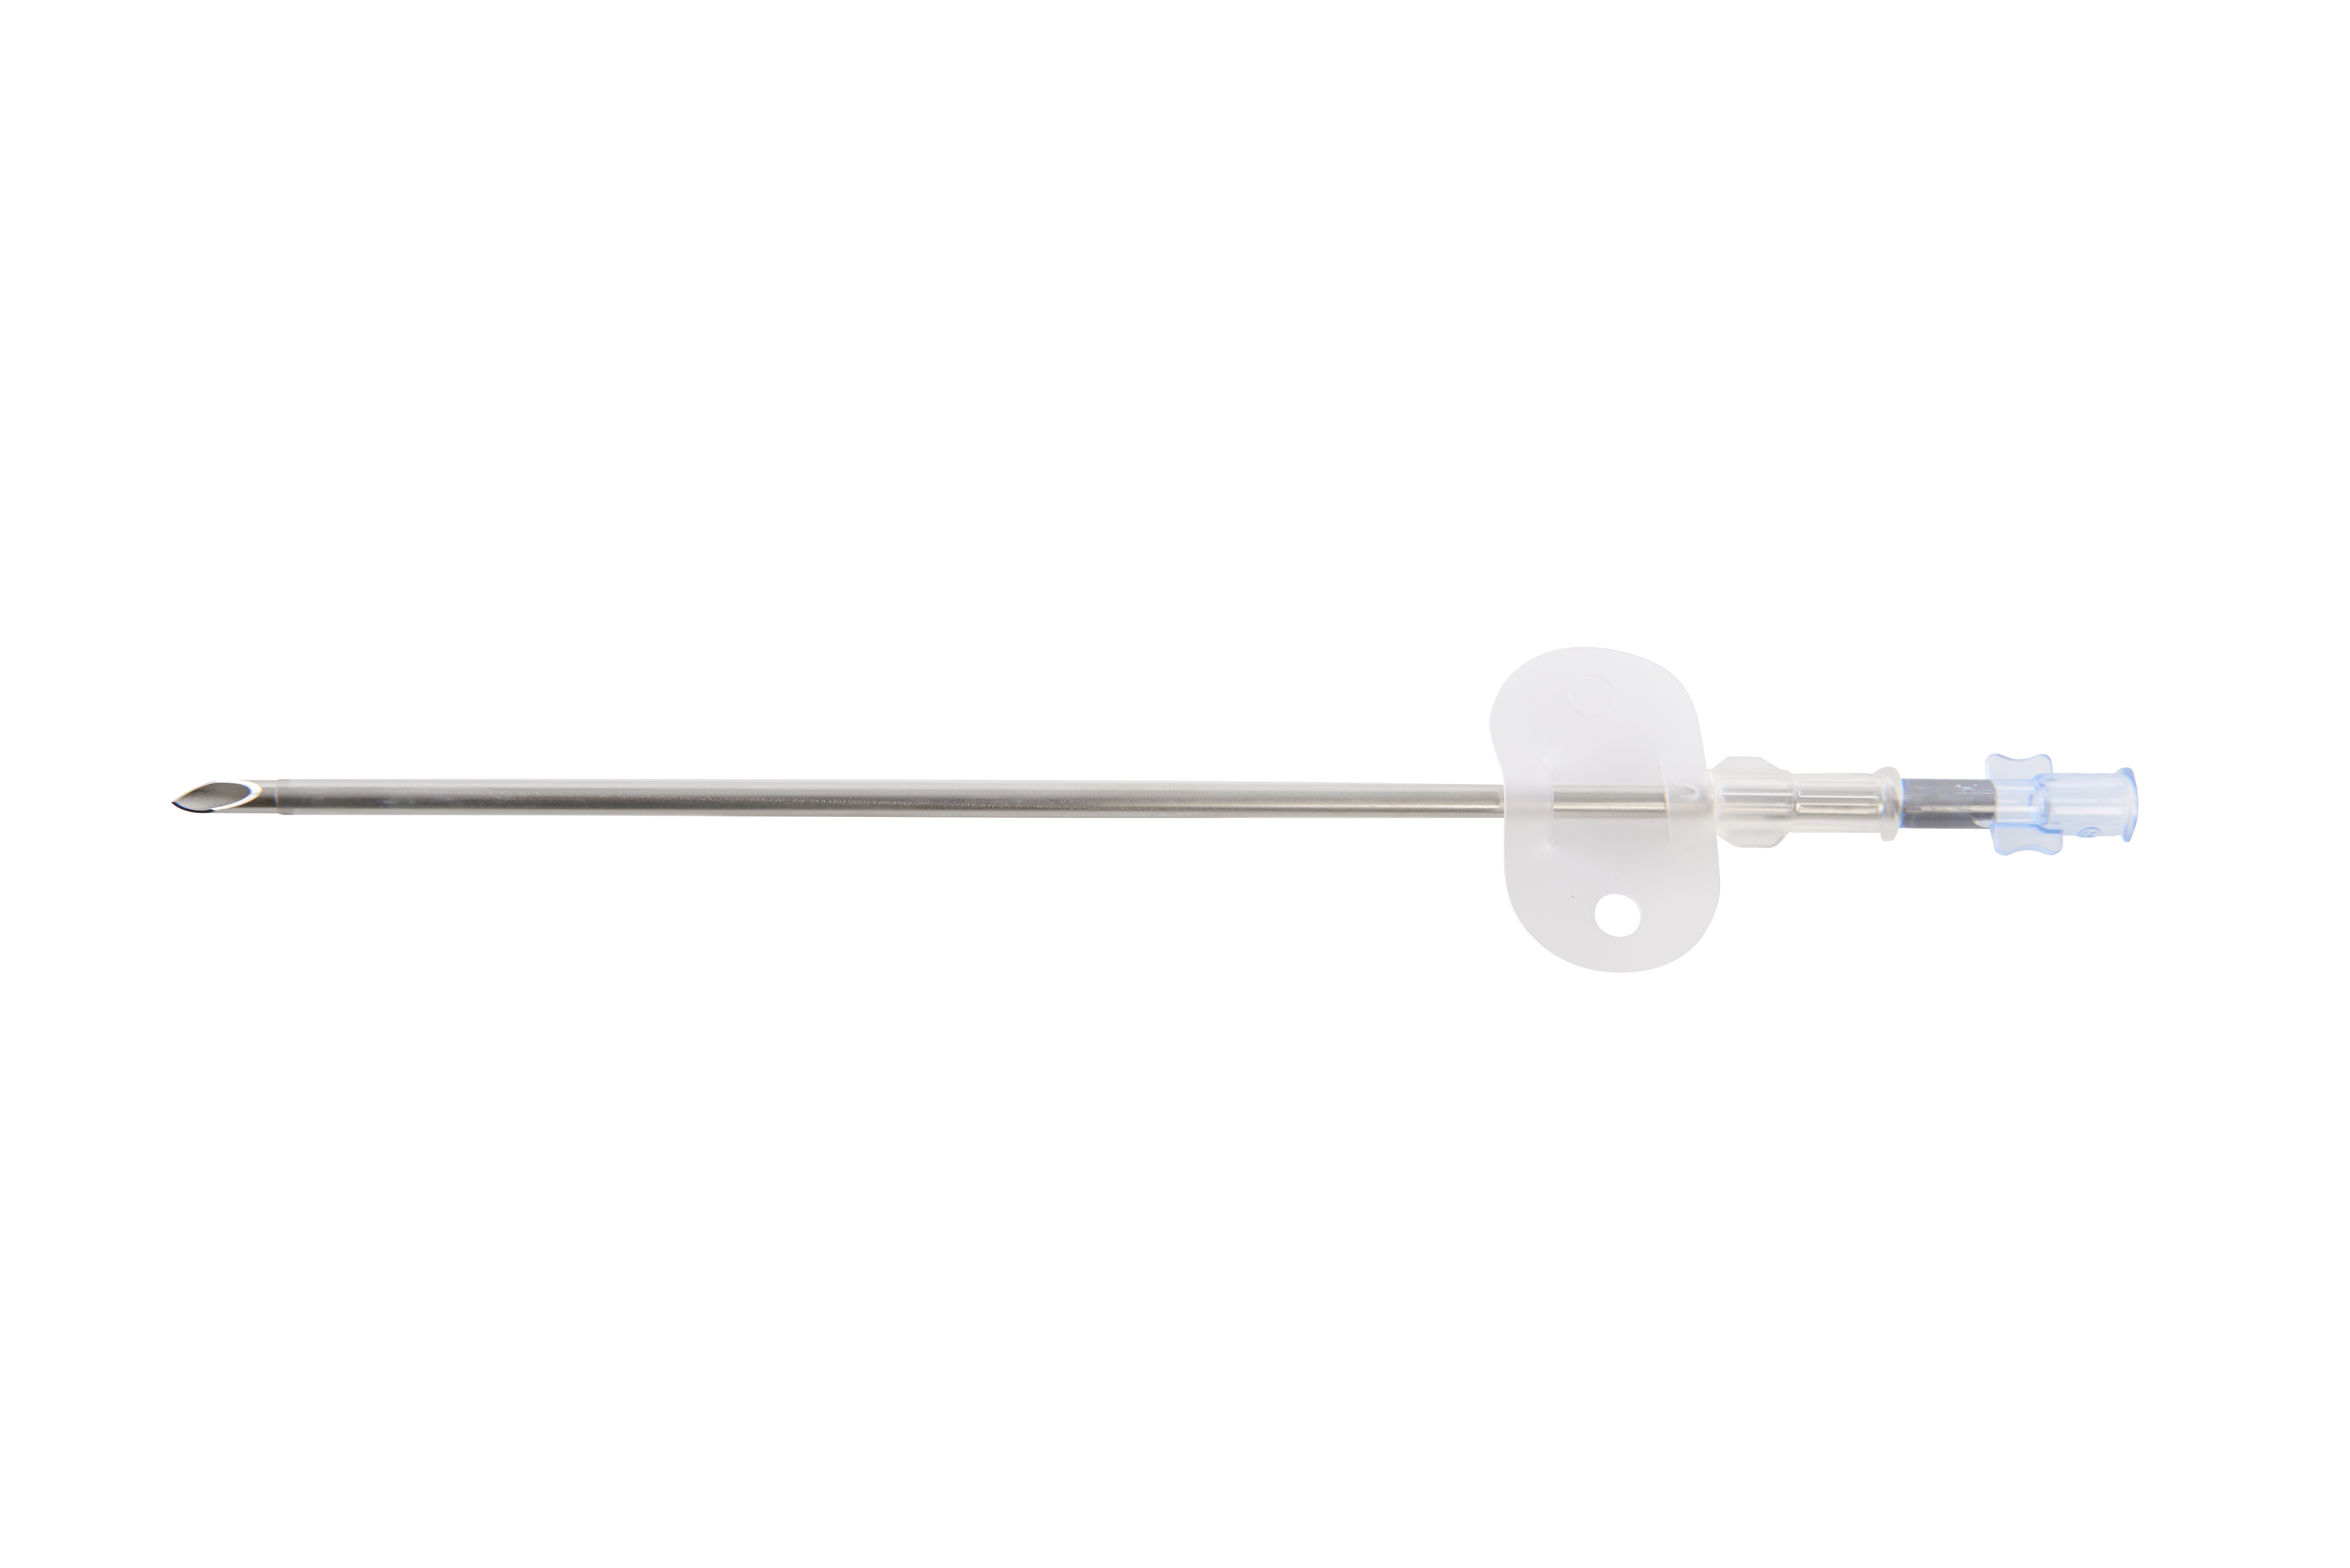 Spare Infusor Needle, 10G x 5.5'', Luer Lock, 3.5 x 138 mm